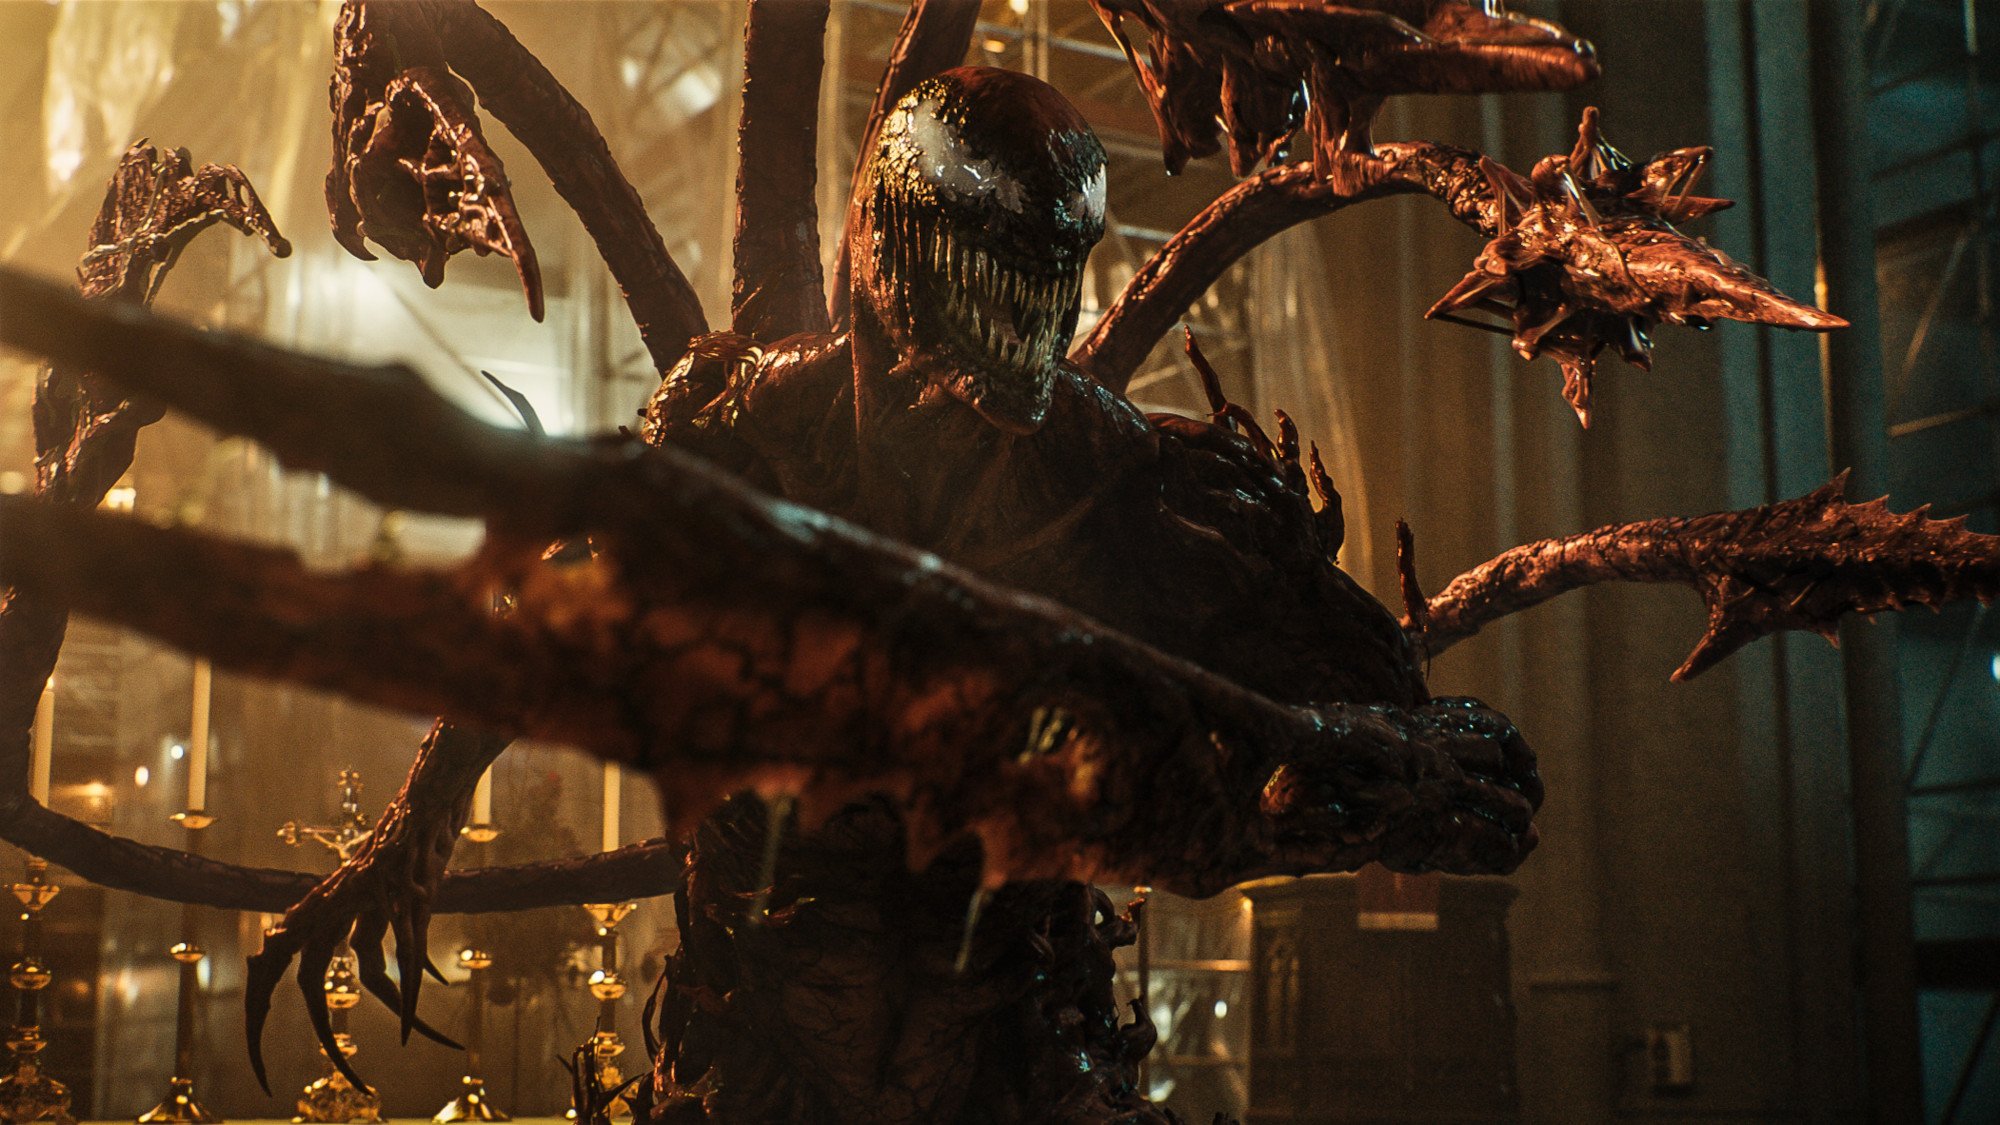 Carnage in Sony Pictures' 'Venom: Let There Be Carnage,' which has a PG-13 rating. His teeth are bared and his spiked limbs are pointing at someone off-screen.